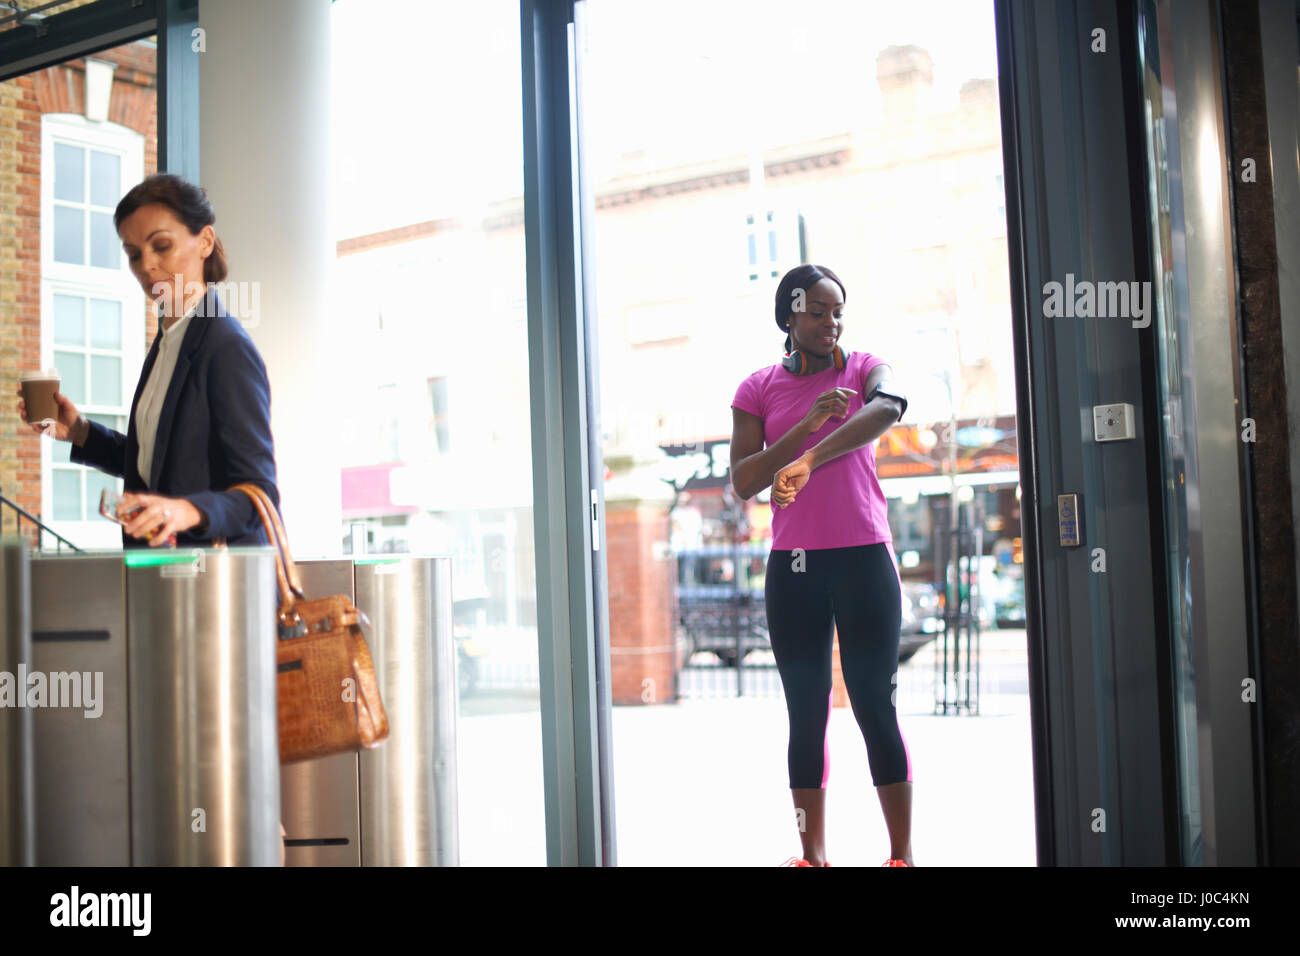 Women arriving at entrance to work Stock Photo